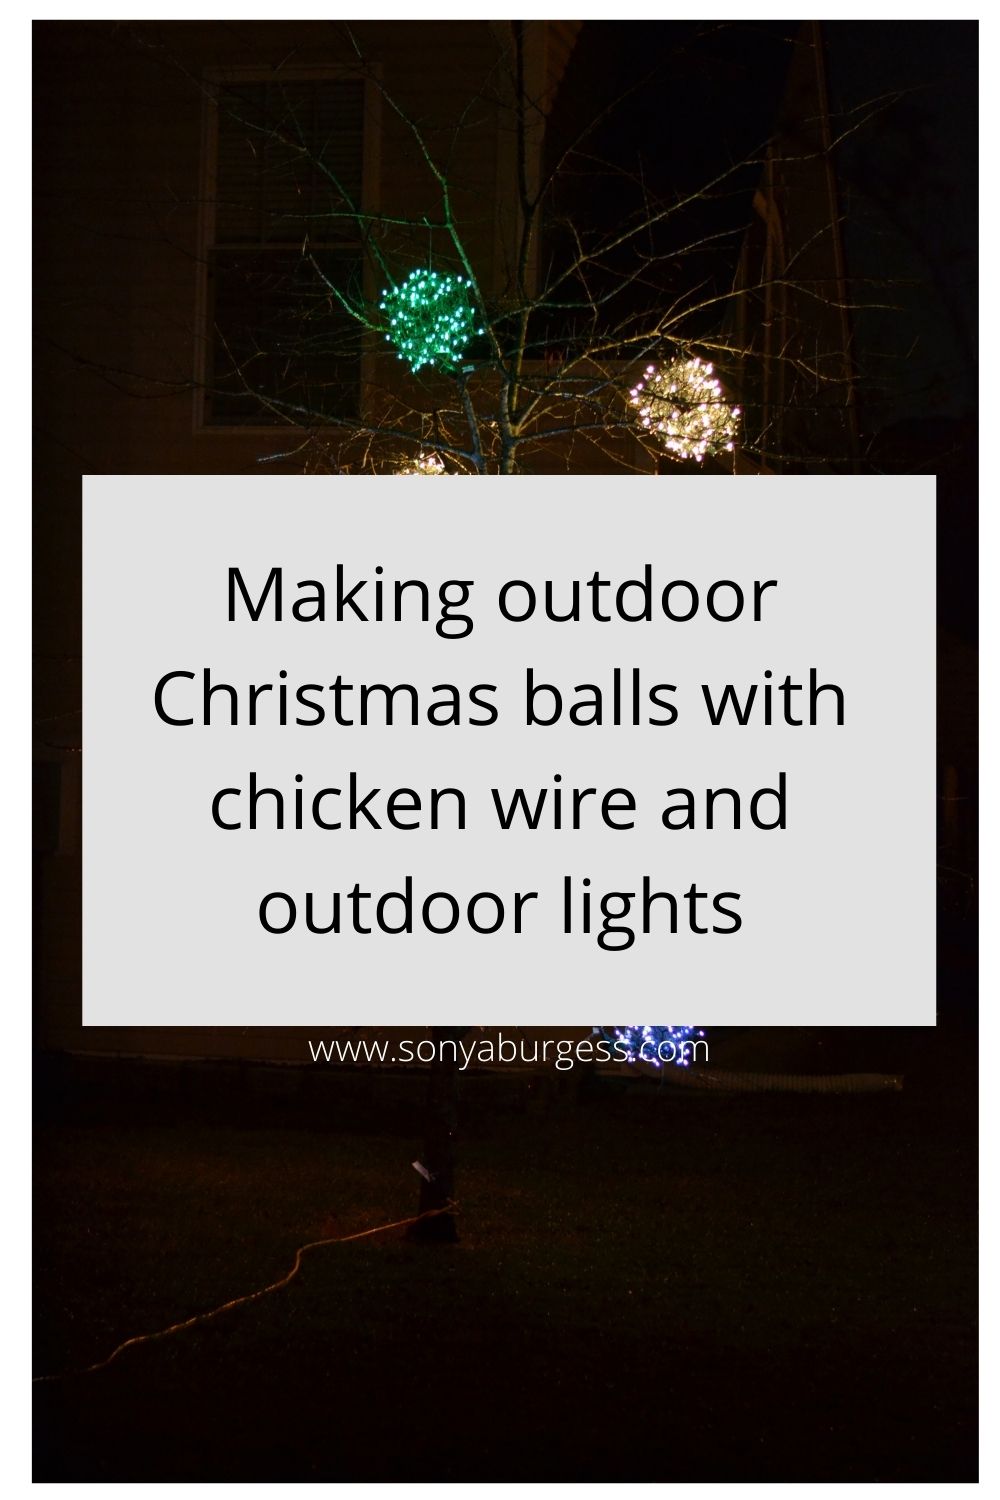 How to make outdoor Christmas balls with chicken wire